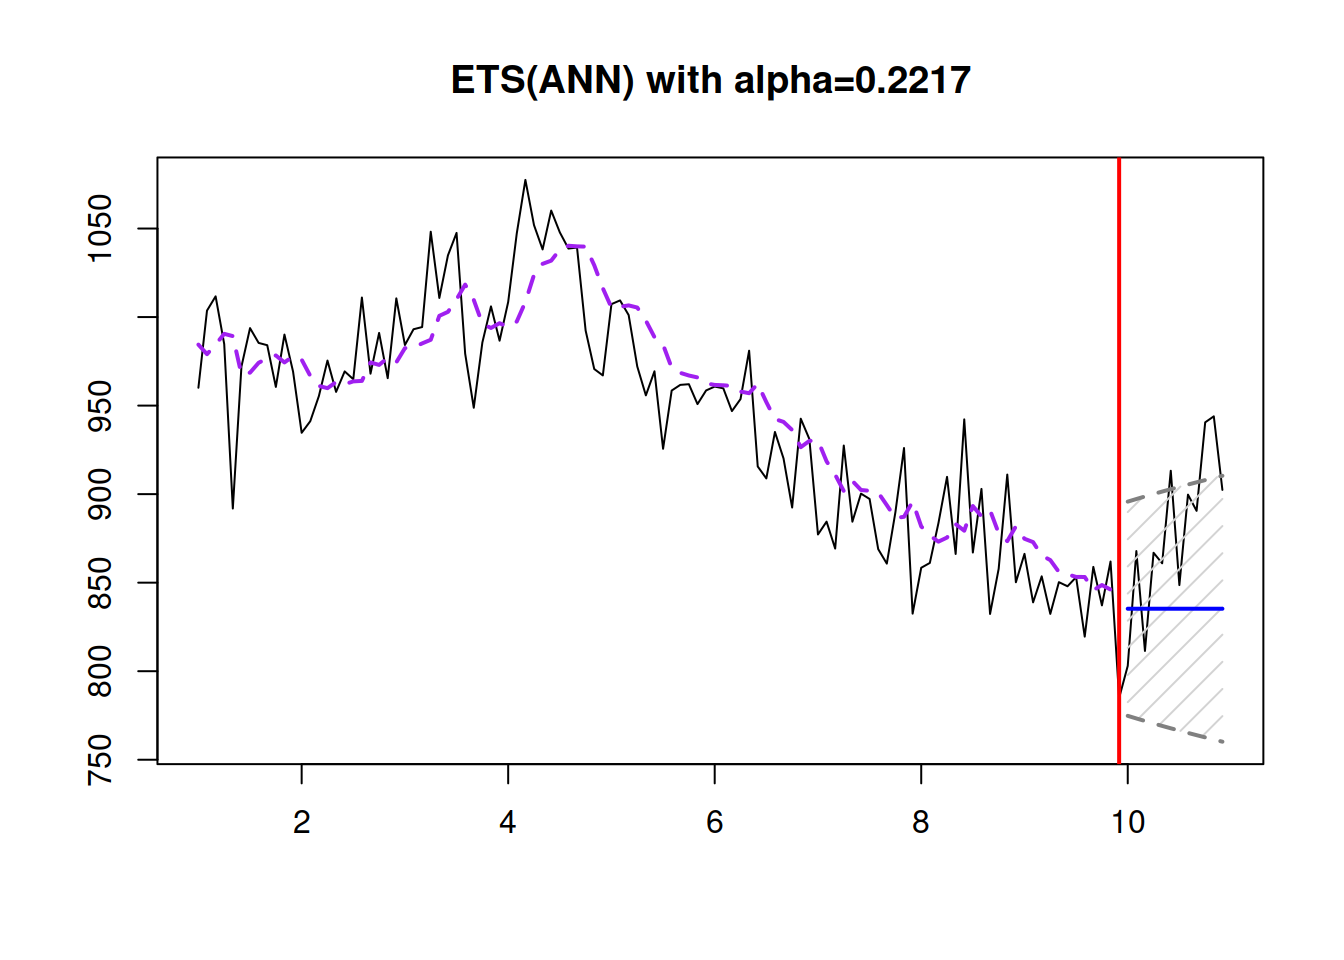 An example of ETS(A,N,N) applied to the data generated from the same model.